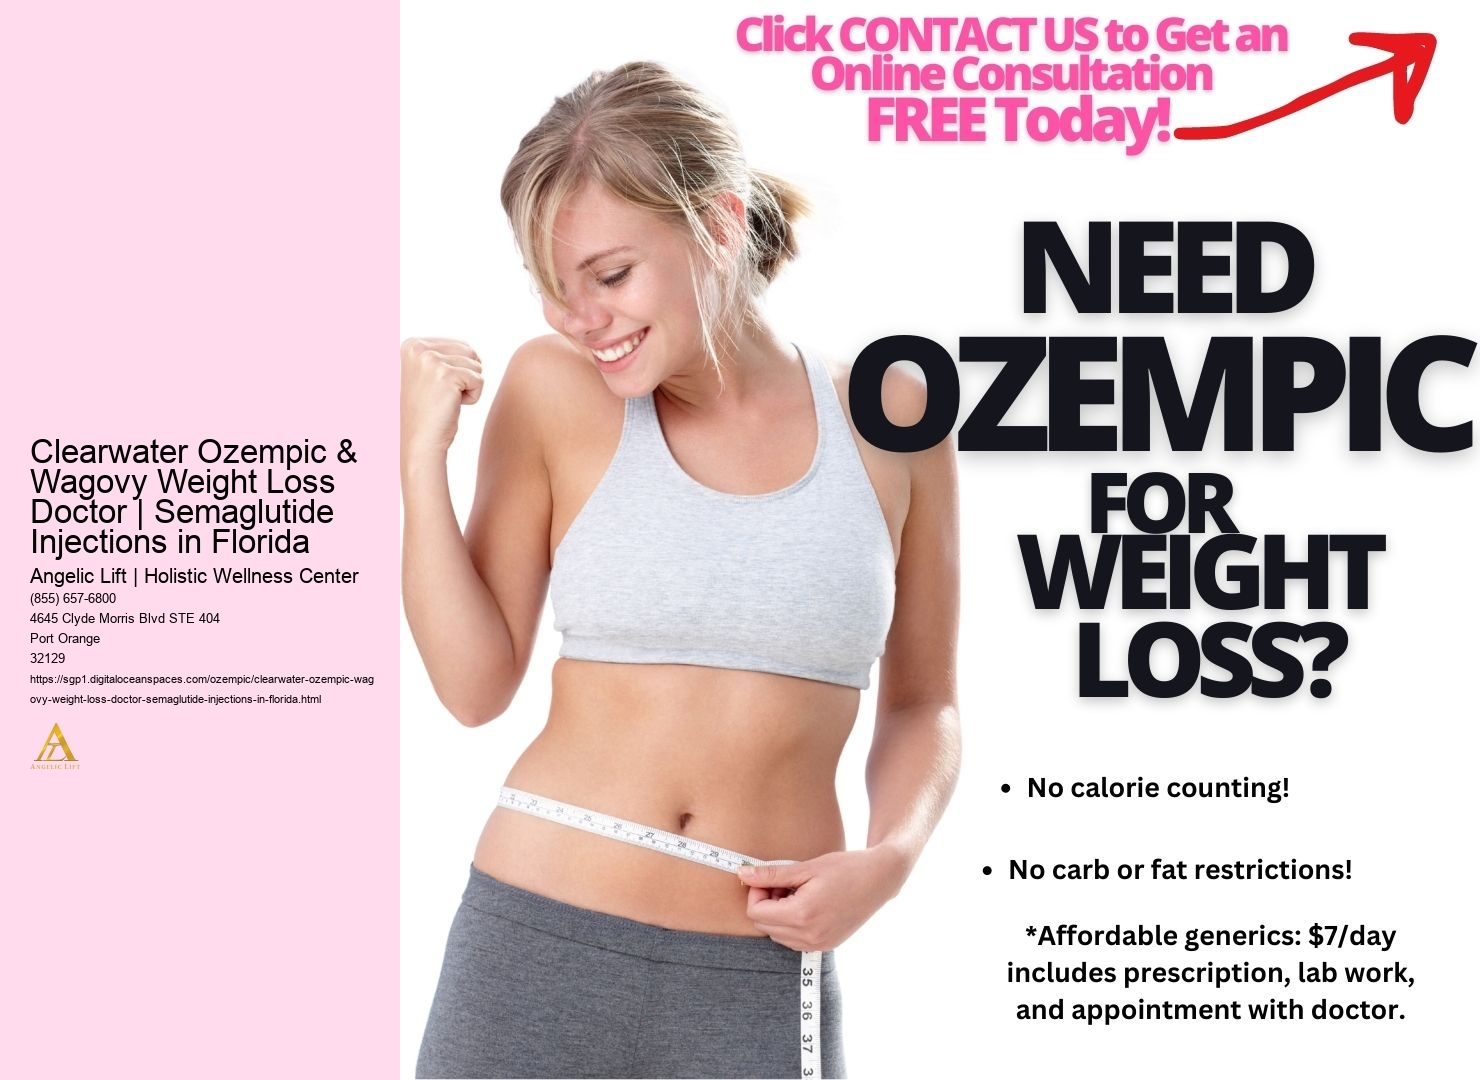 Clearwater Ozempic & Wagovy Weight Loss Doctor | Semaglutide Injections in Florida